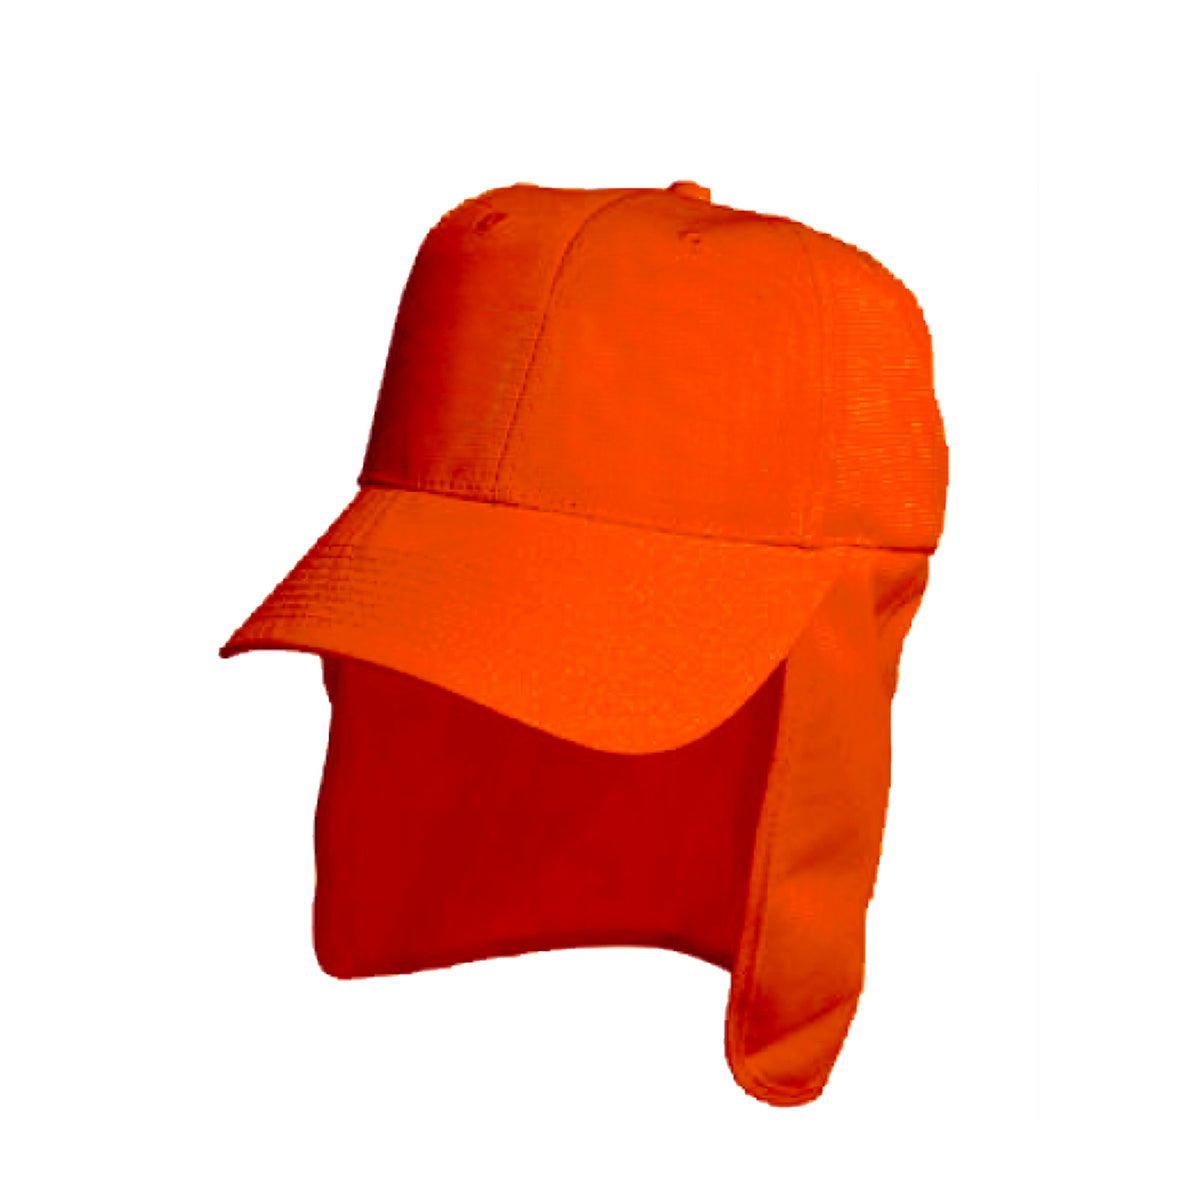 orange luminescent safety cap with flap